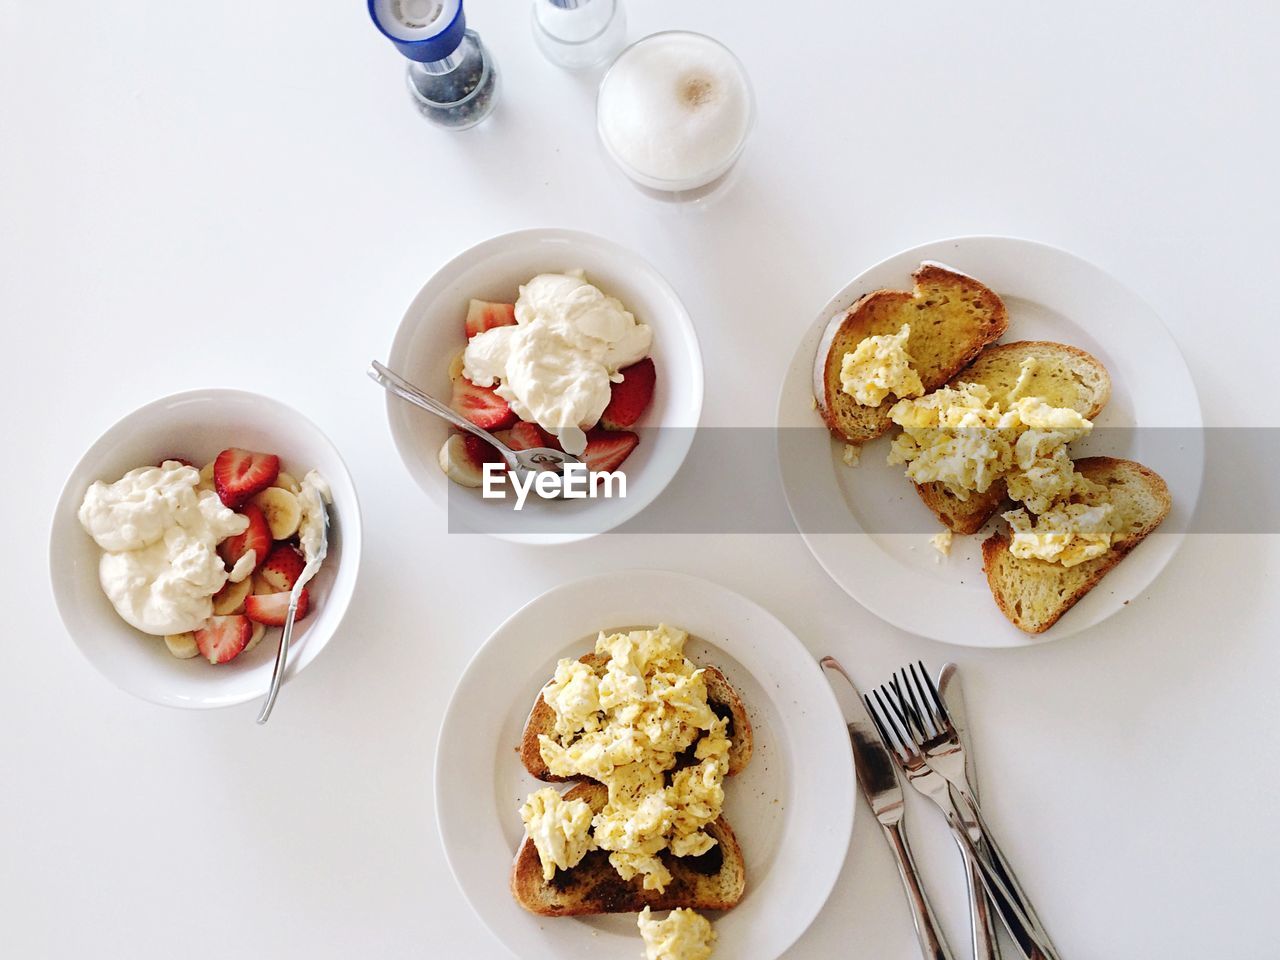 High angle view of scrambled eggs on toast and yogurt with fruits served on table